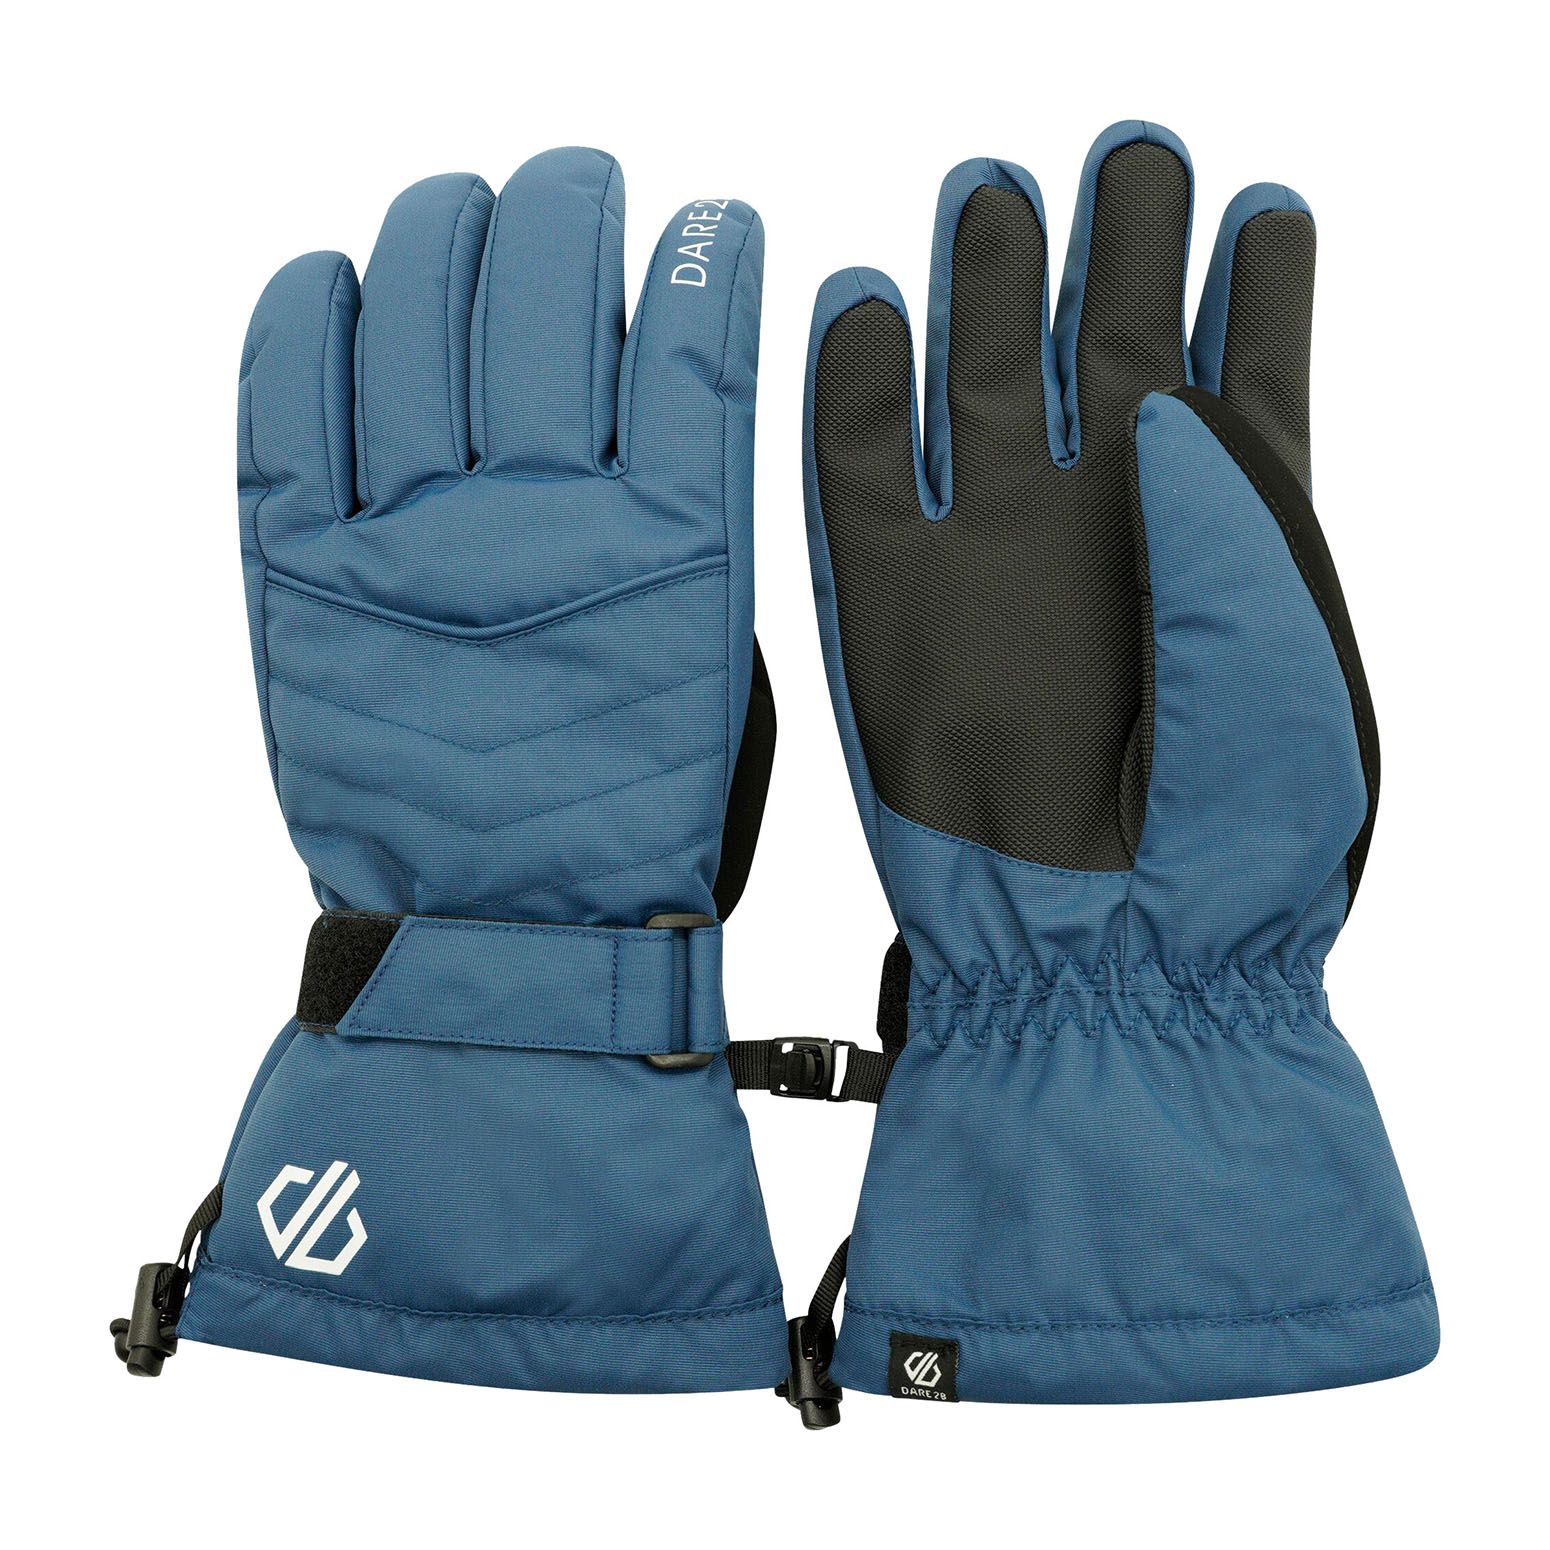 Polyester fabric with waterproof and breathable Ared 5000 insert. Water repellent finish. High loft polyester padding. Warm scrim lining. Synthetic nubuck thumb. Textured gripped palm. Elasticated wrist. Adjustable cuffs. Secure clip attachment. Shockcord and toggle lower wrist adjustment.